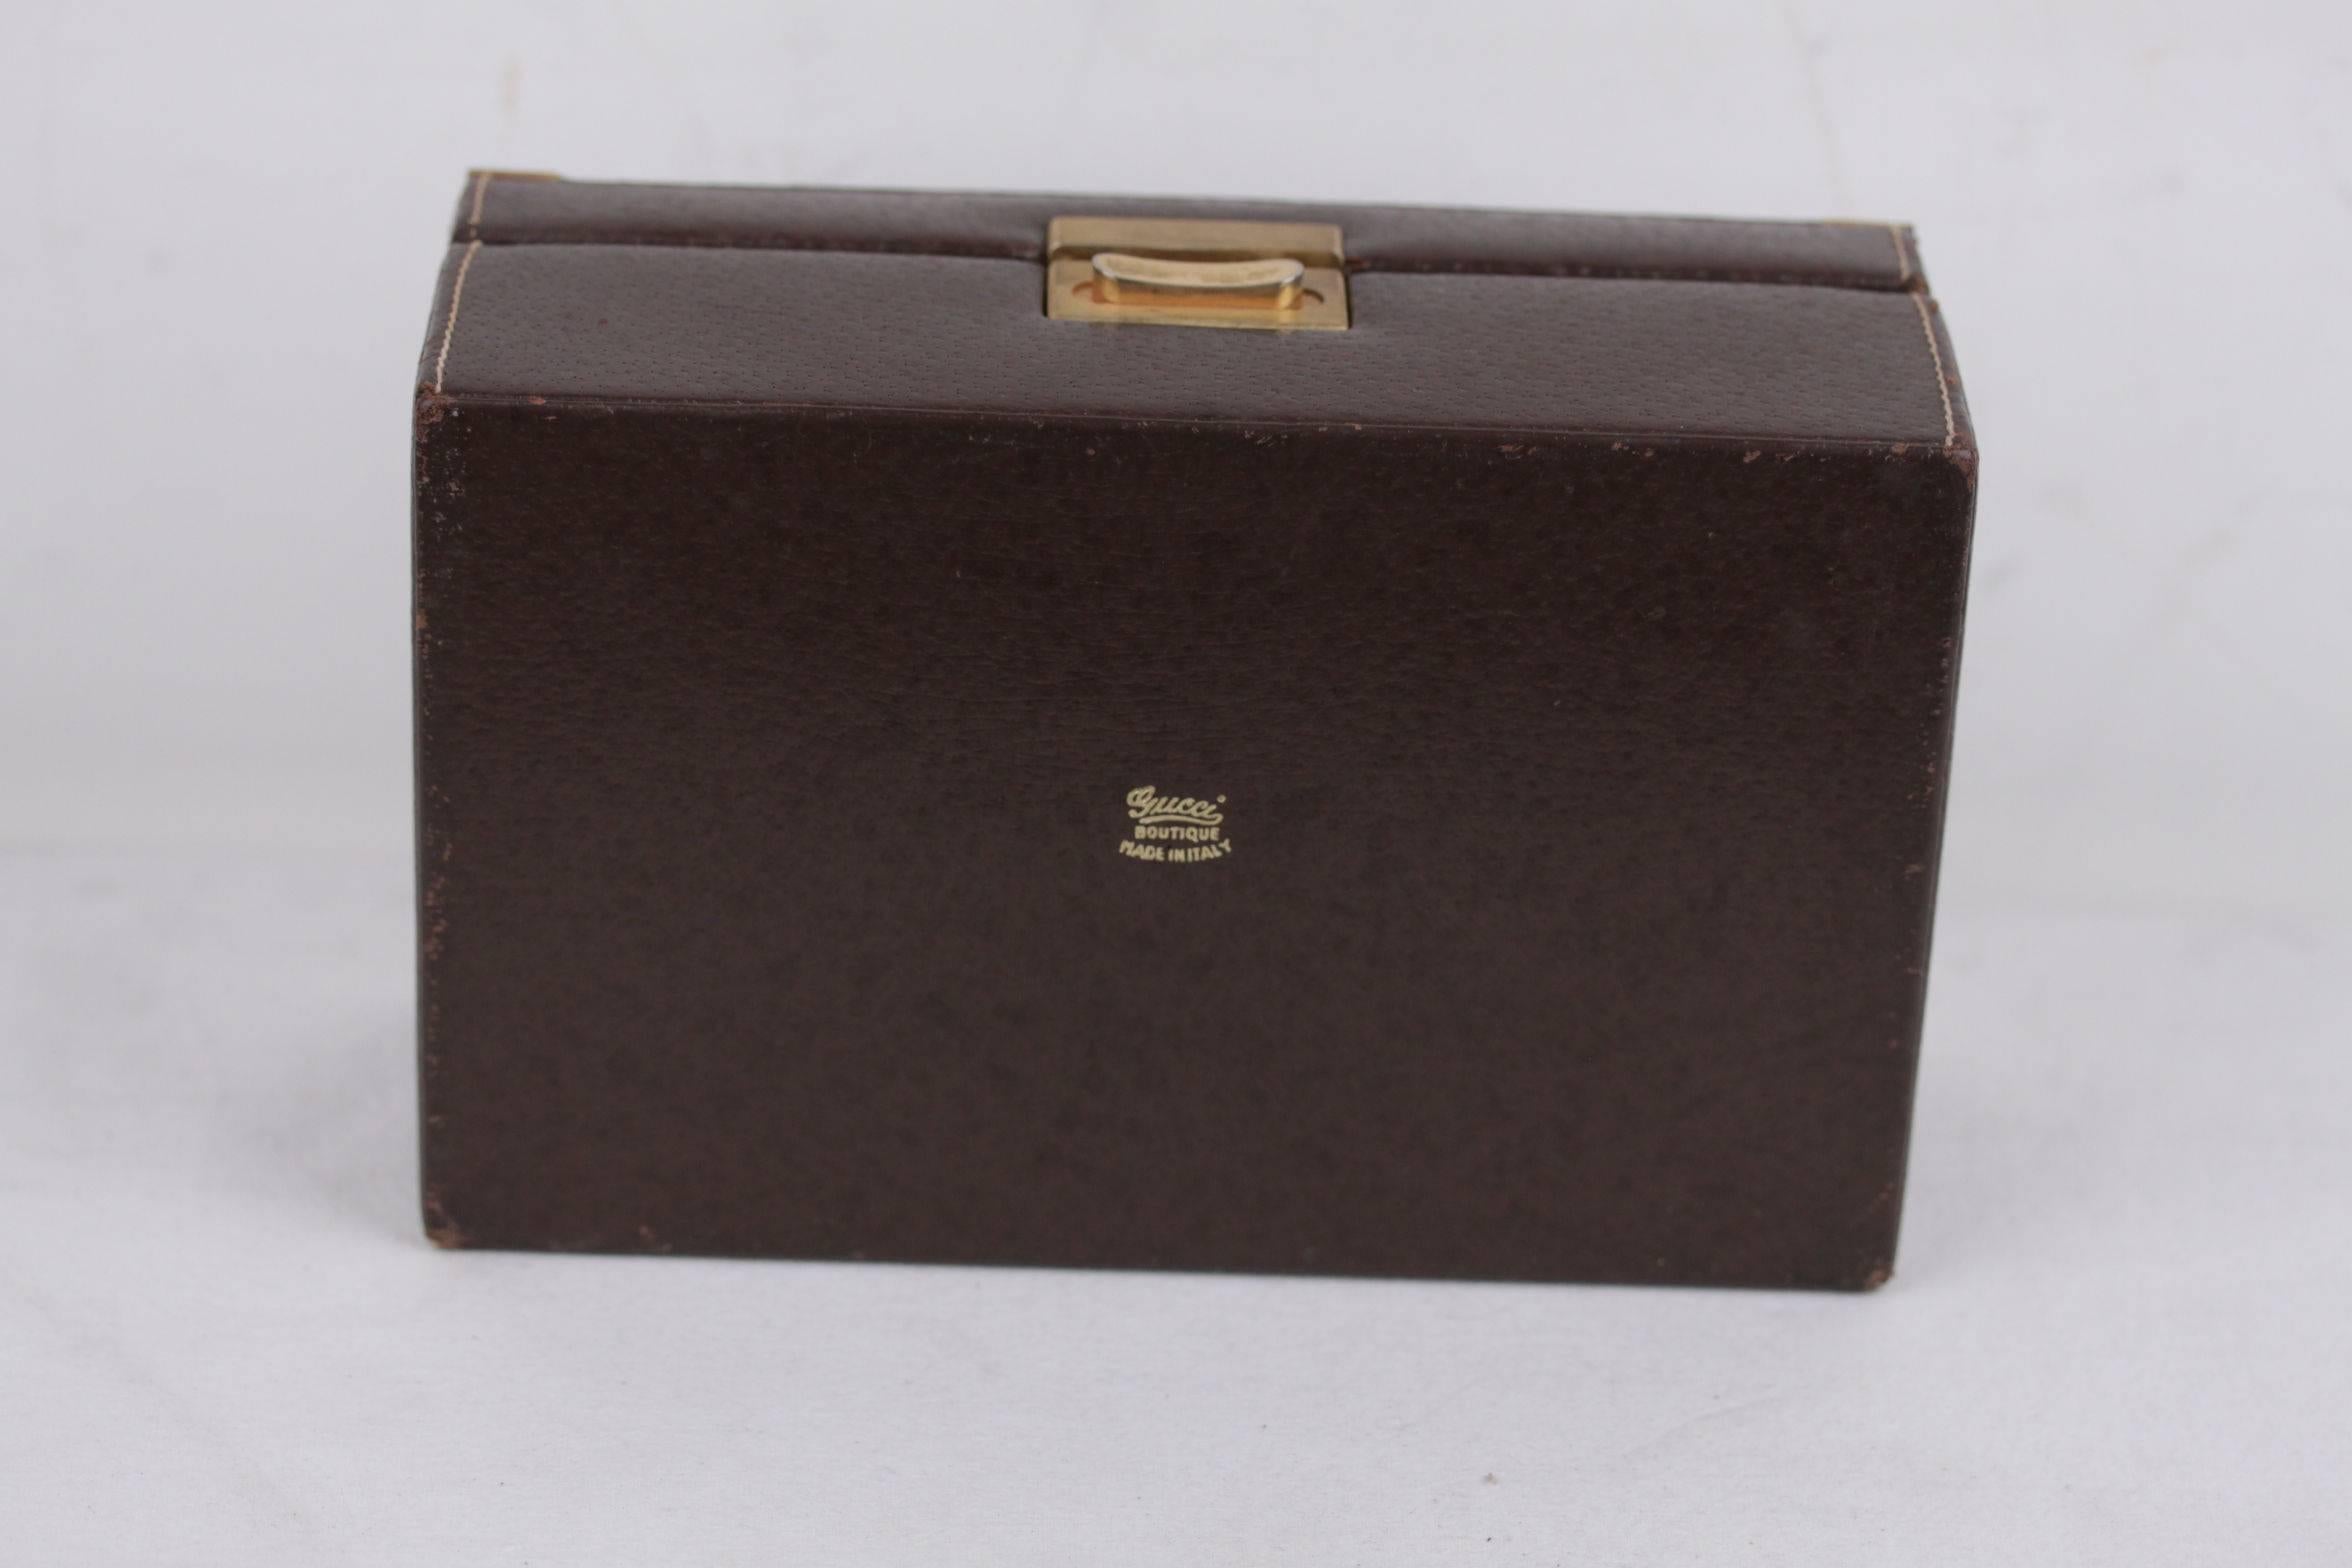 Women's GUCCI Italian VINTAGE Brown Suede & Leather JEWELRY BOX Case